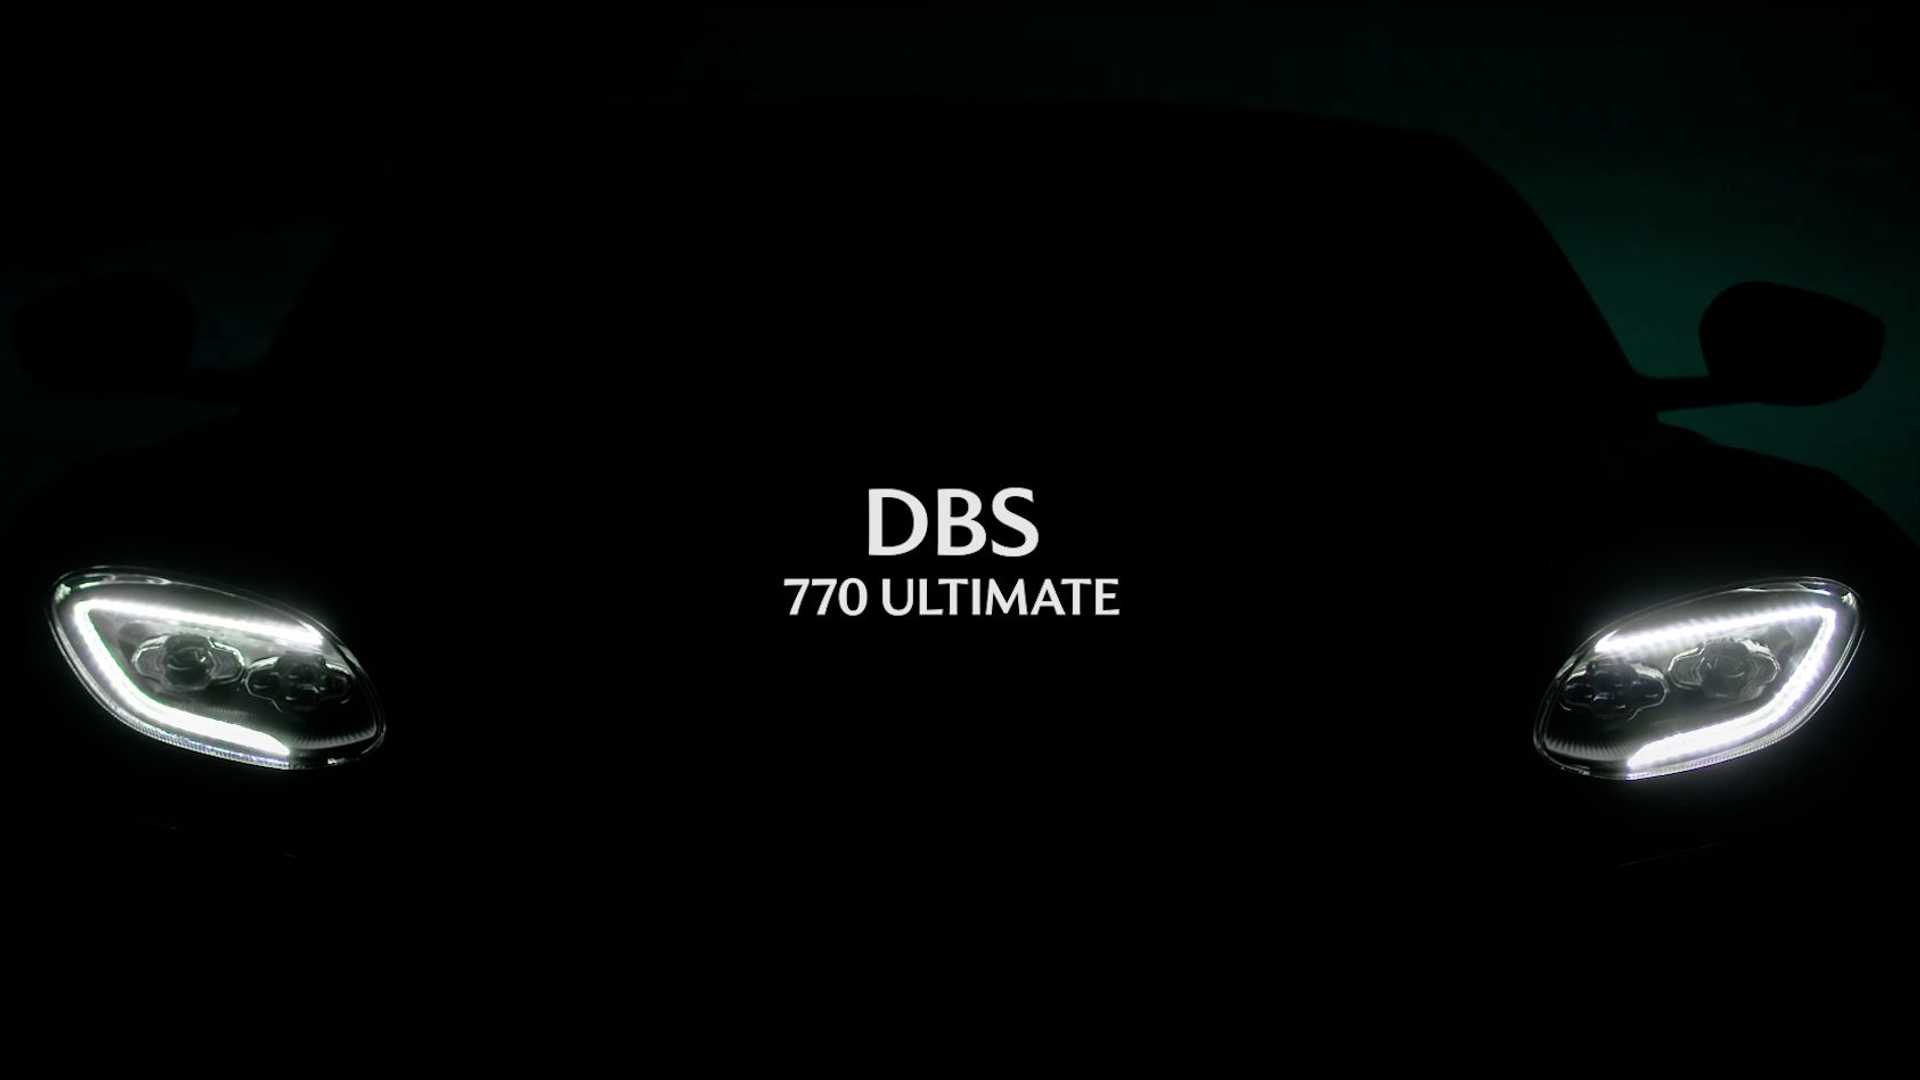  Aston Martin DBS 770 Ultimate Teased For First Time